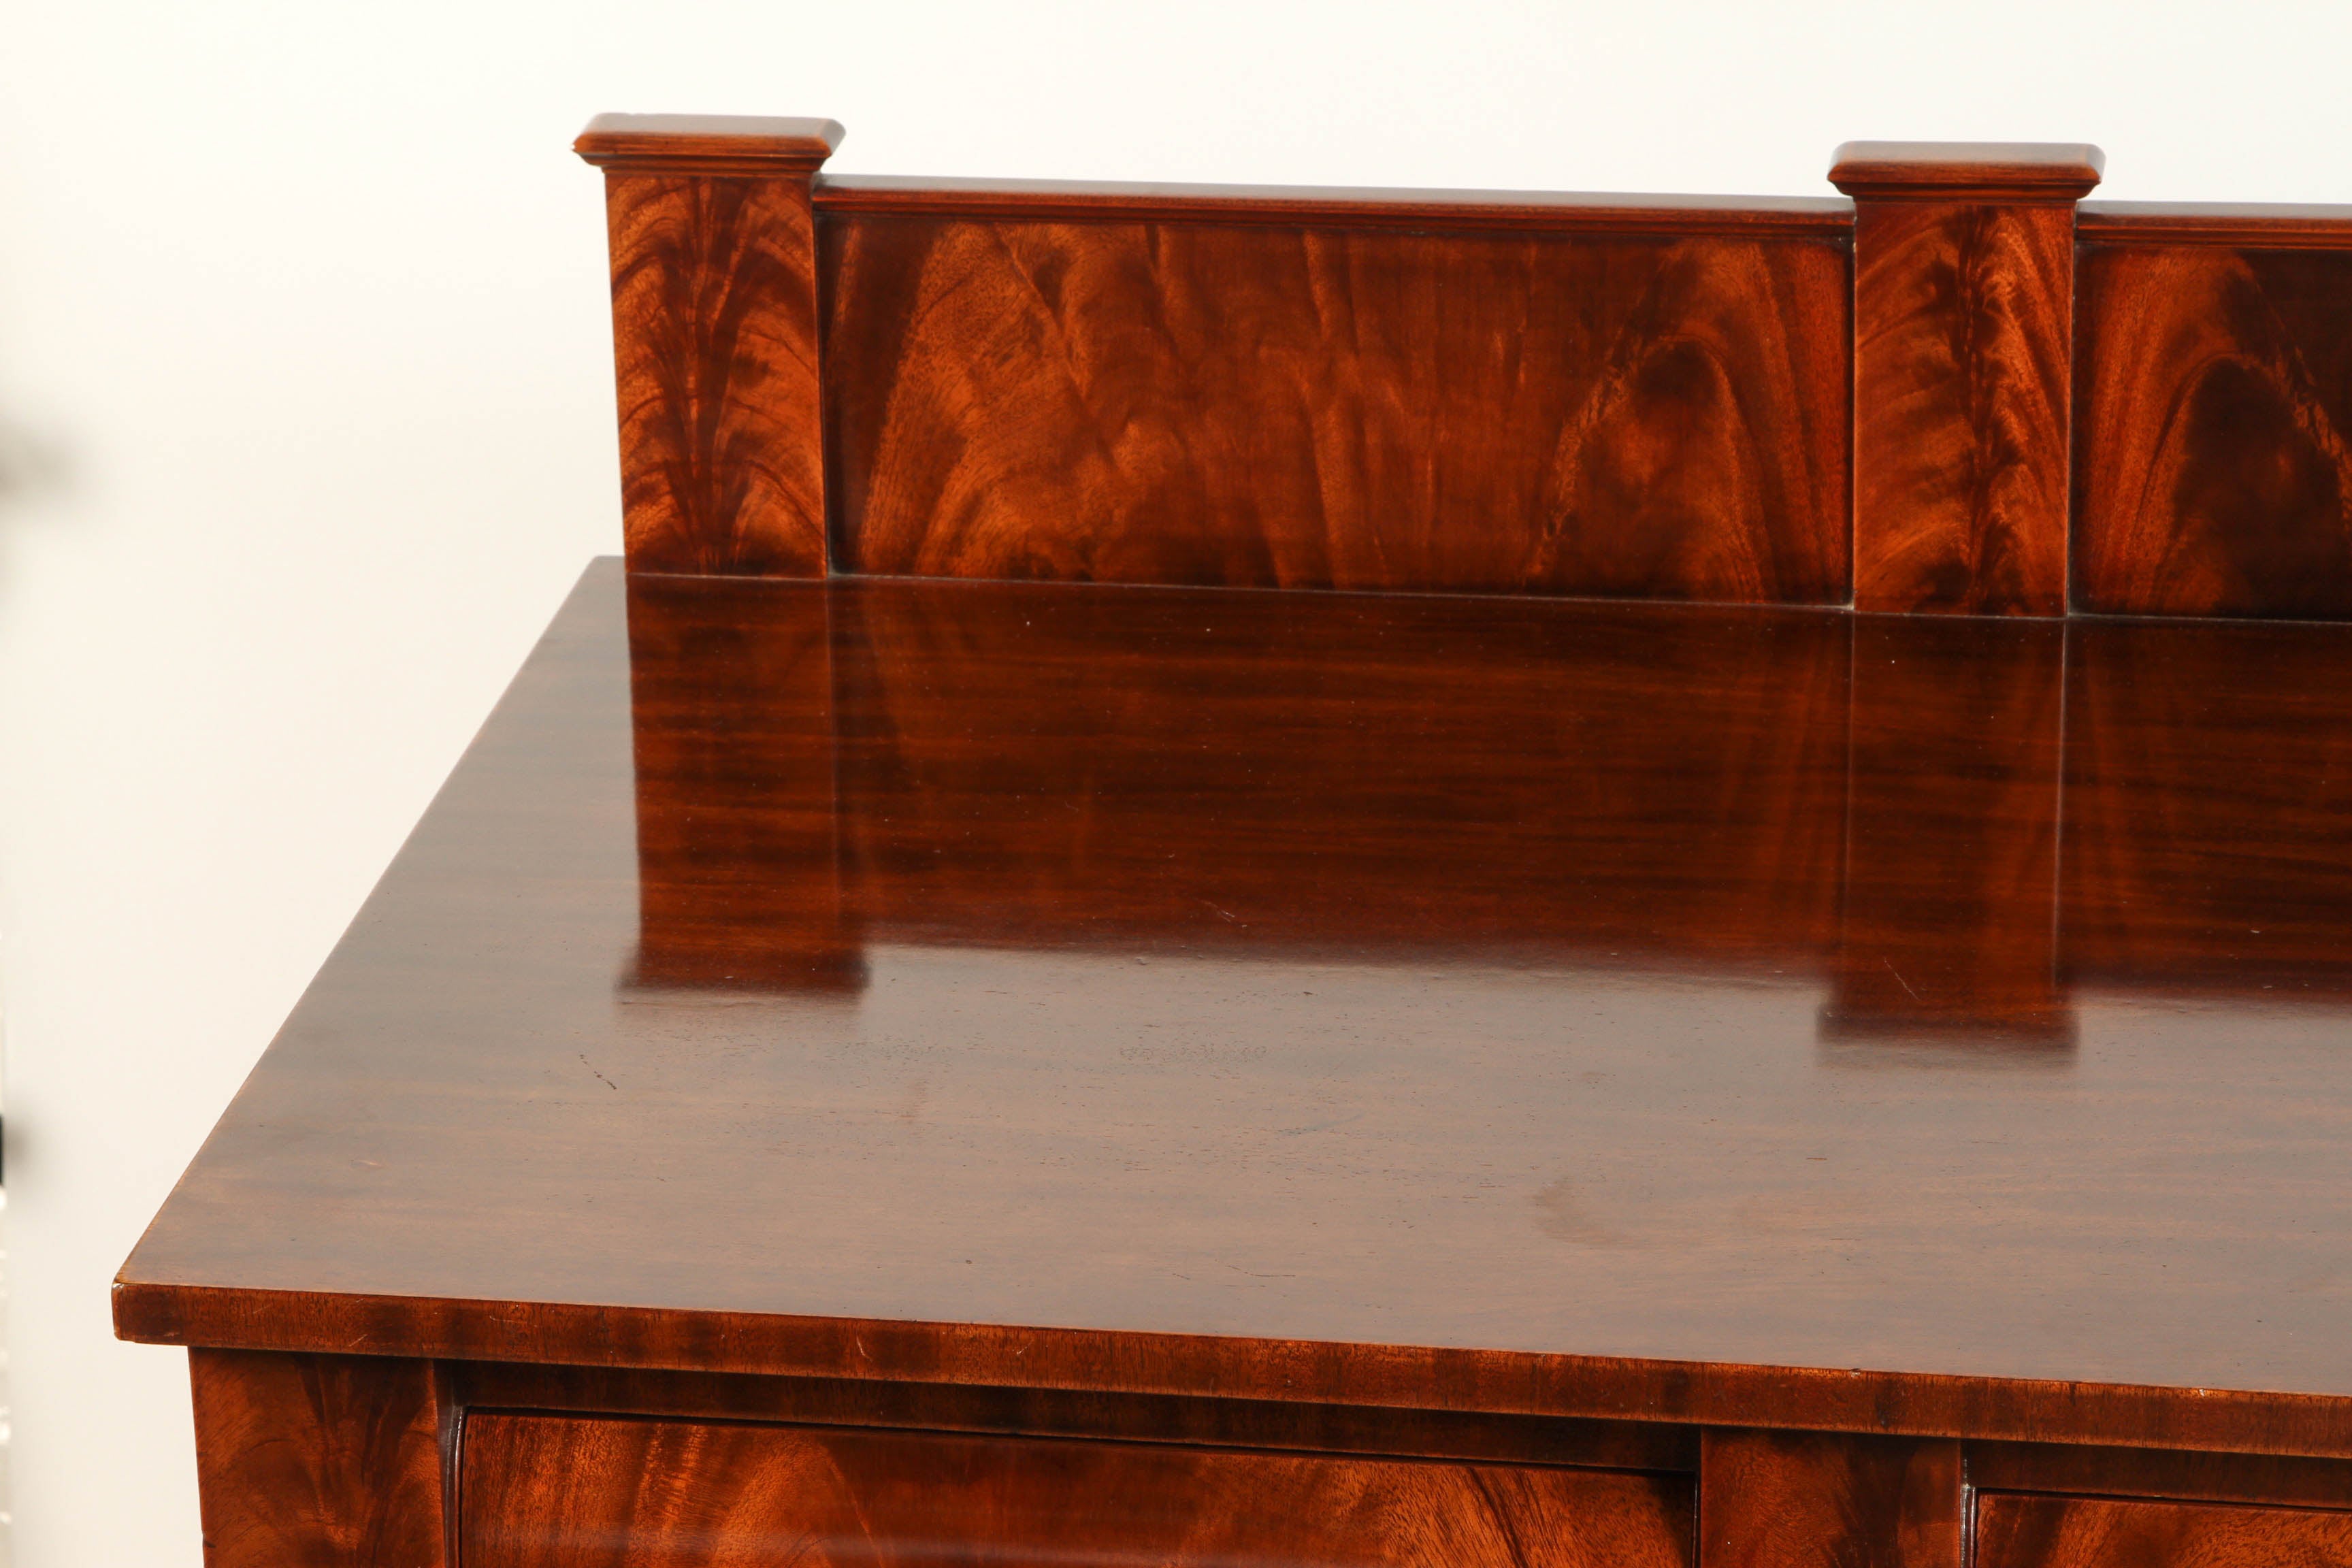 19th Century American Mahogany Sideboard Manufactured by Hathaway